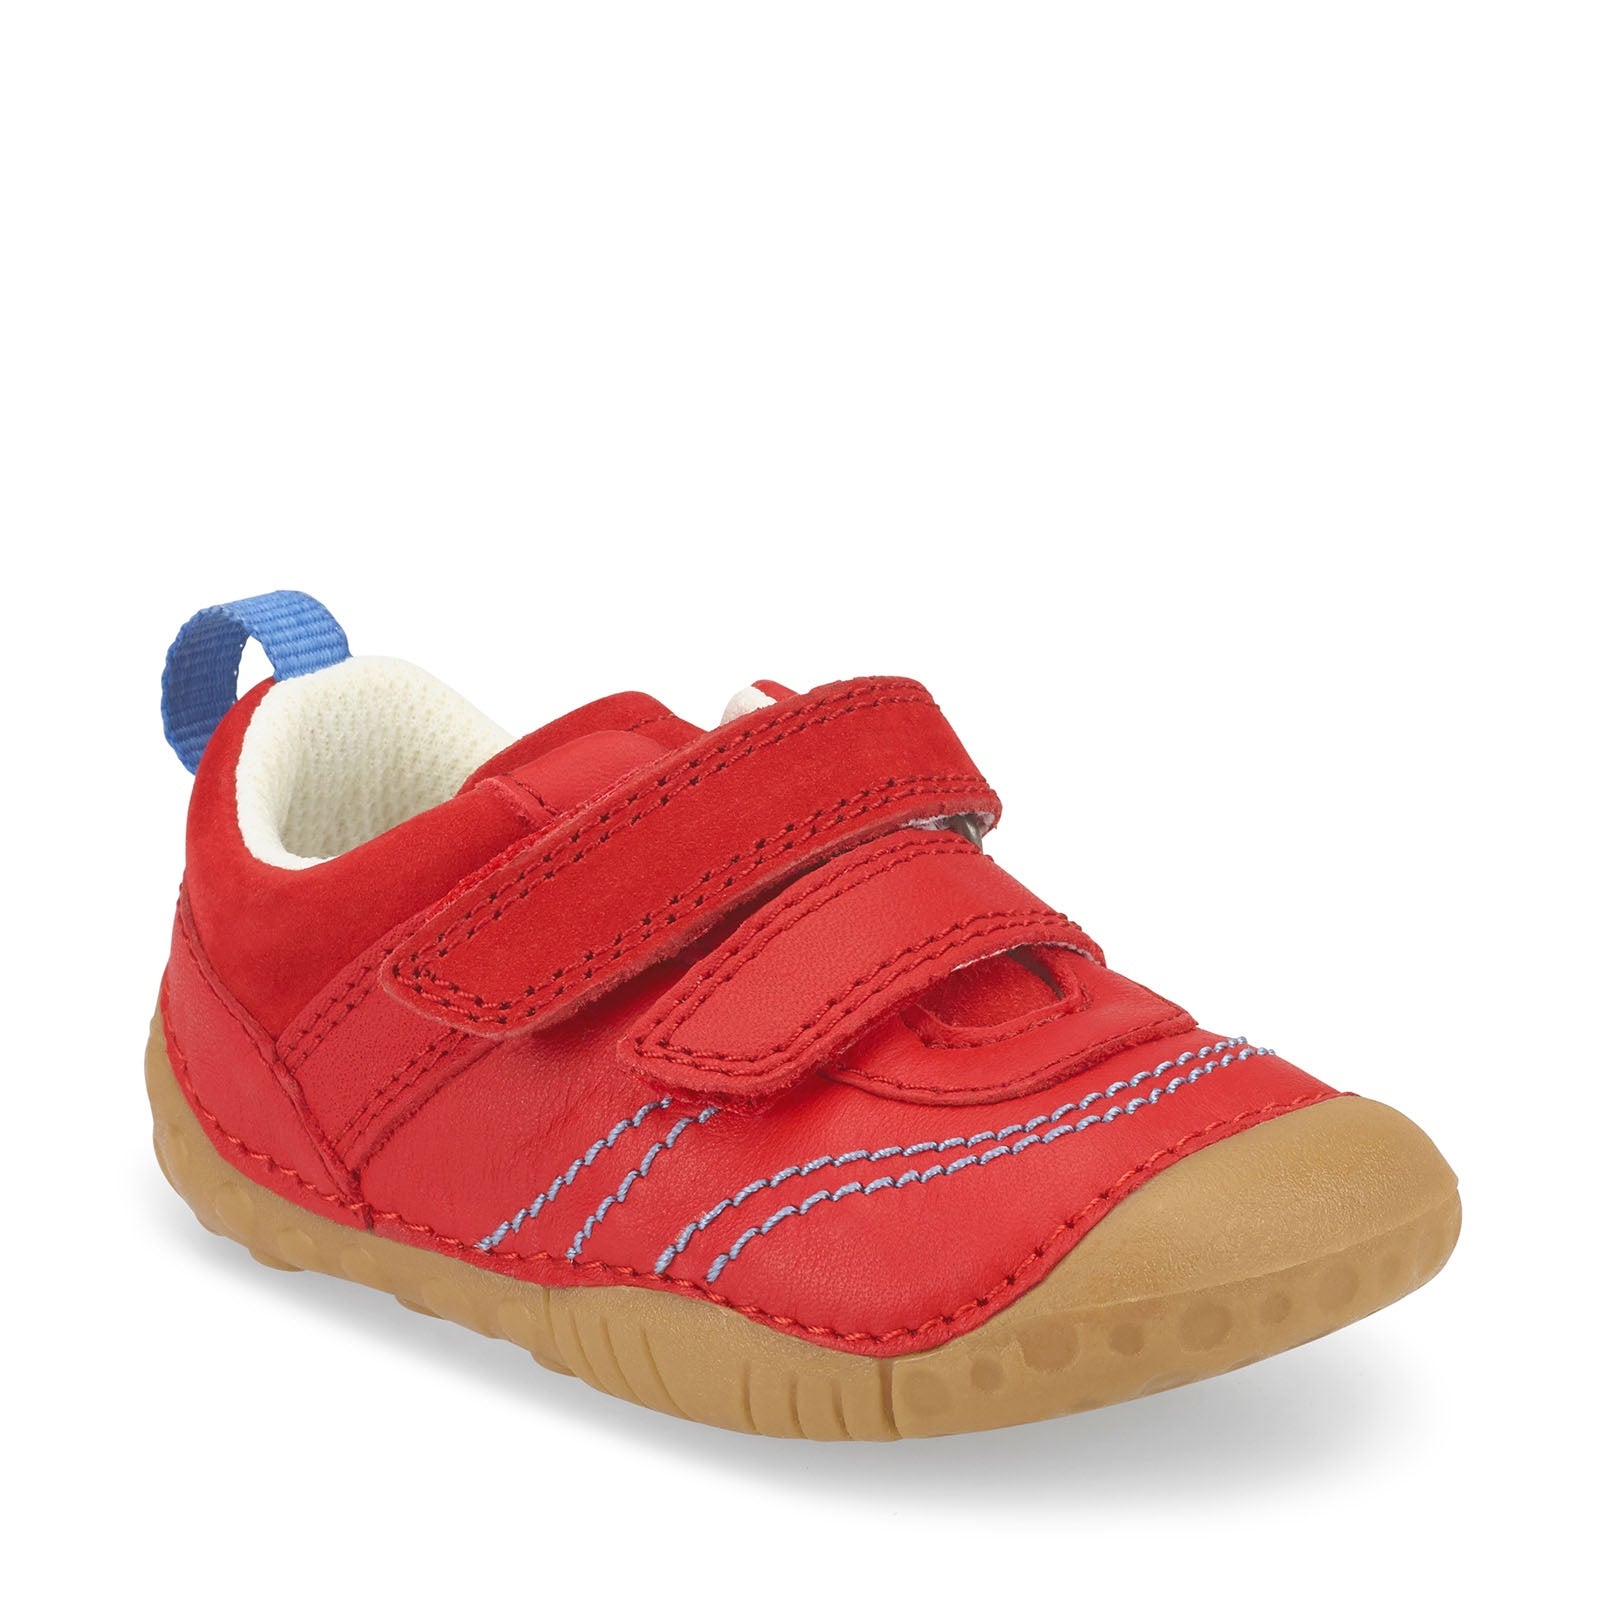 Start-Rite Baby Leo 0747-1 Boys Red Leather Pre Walker Shoes